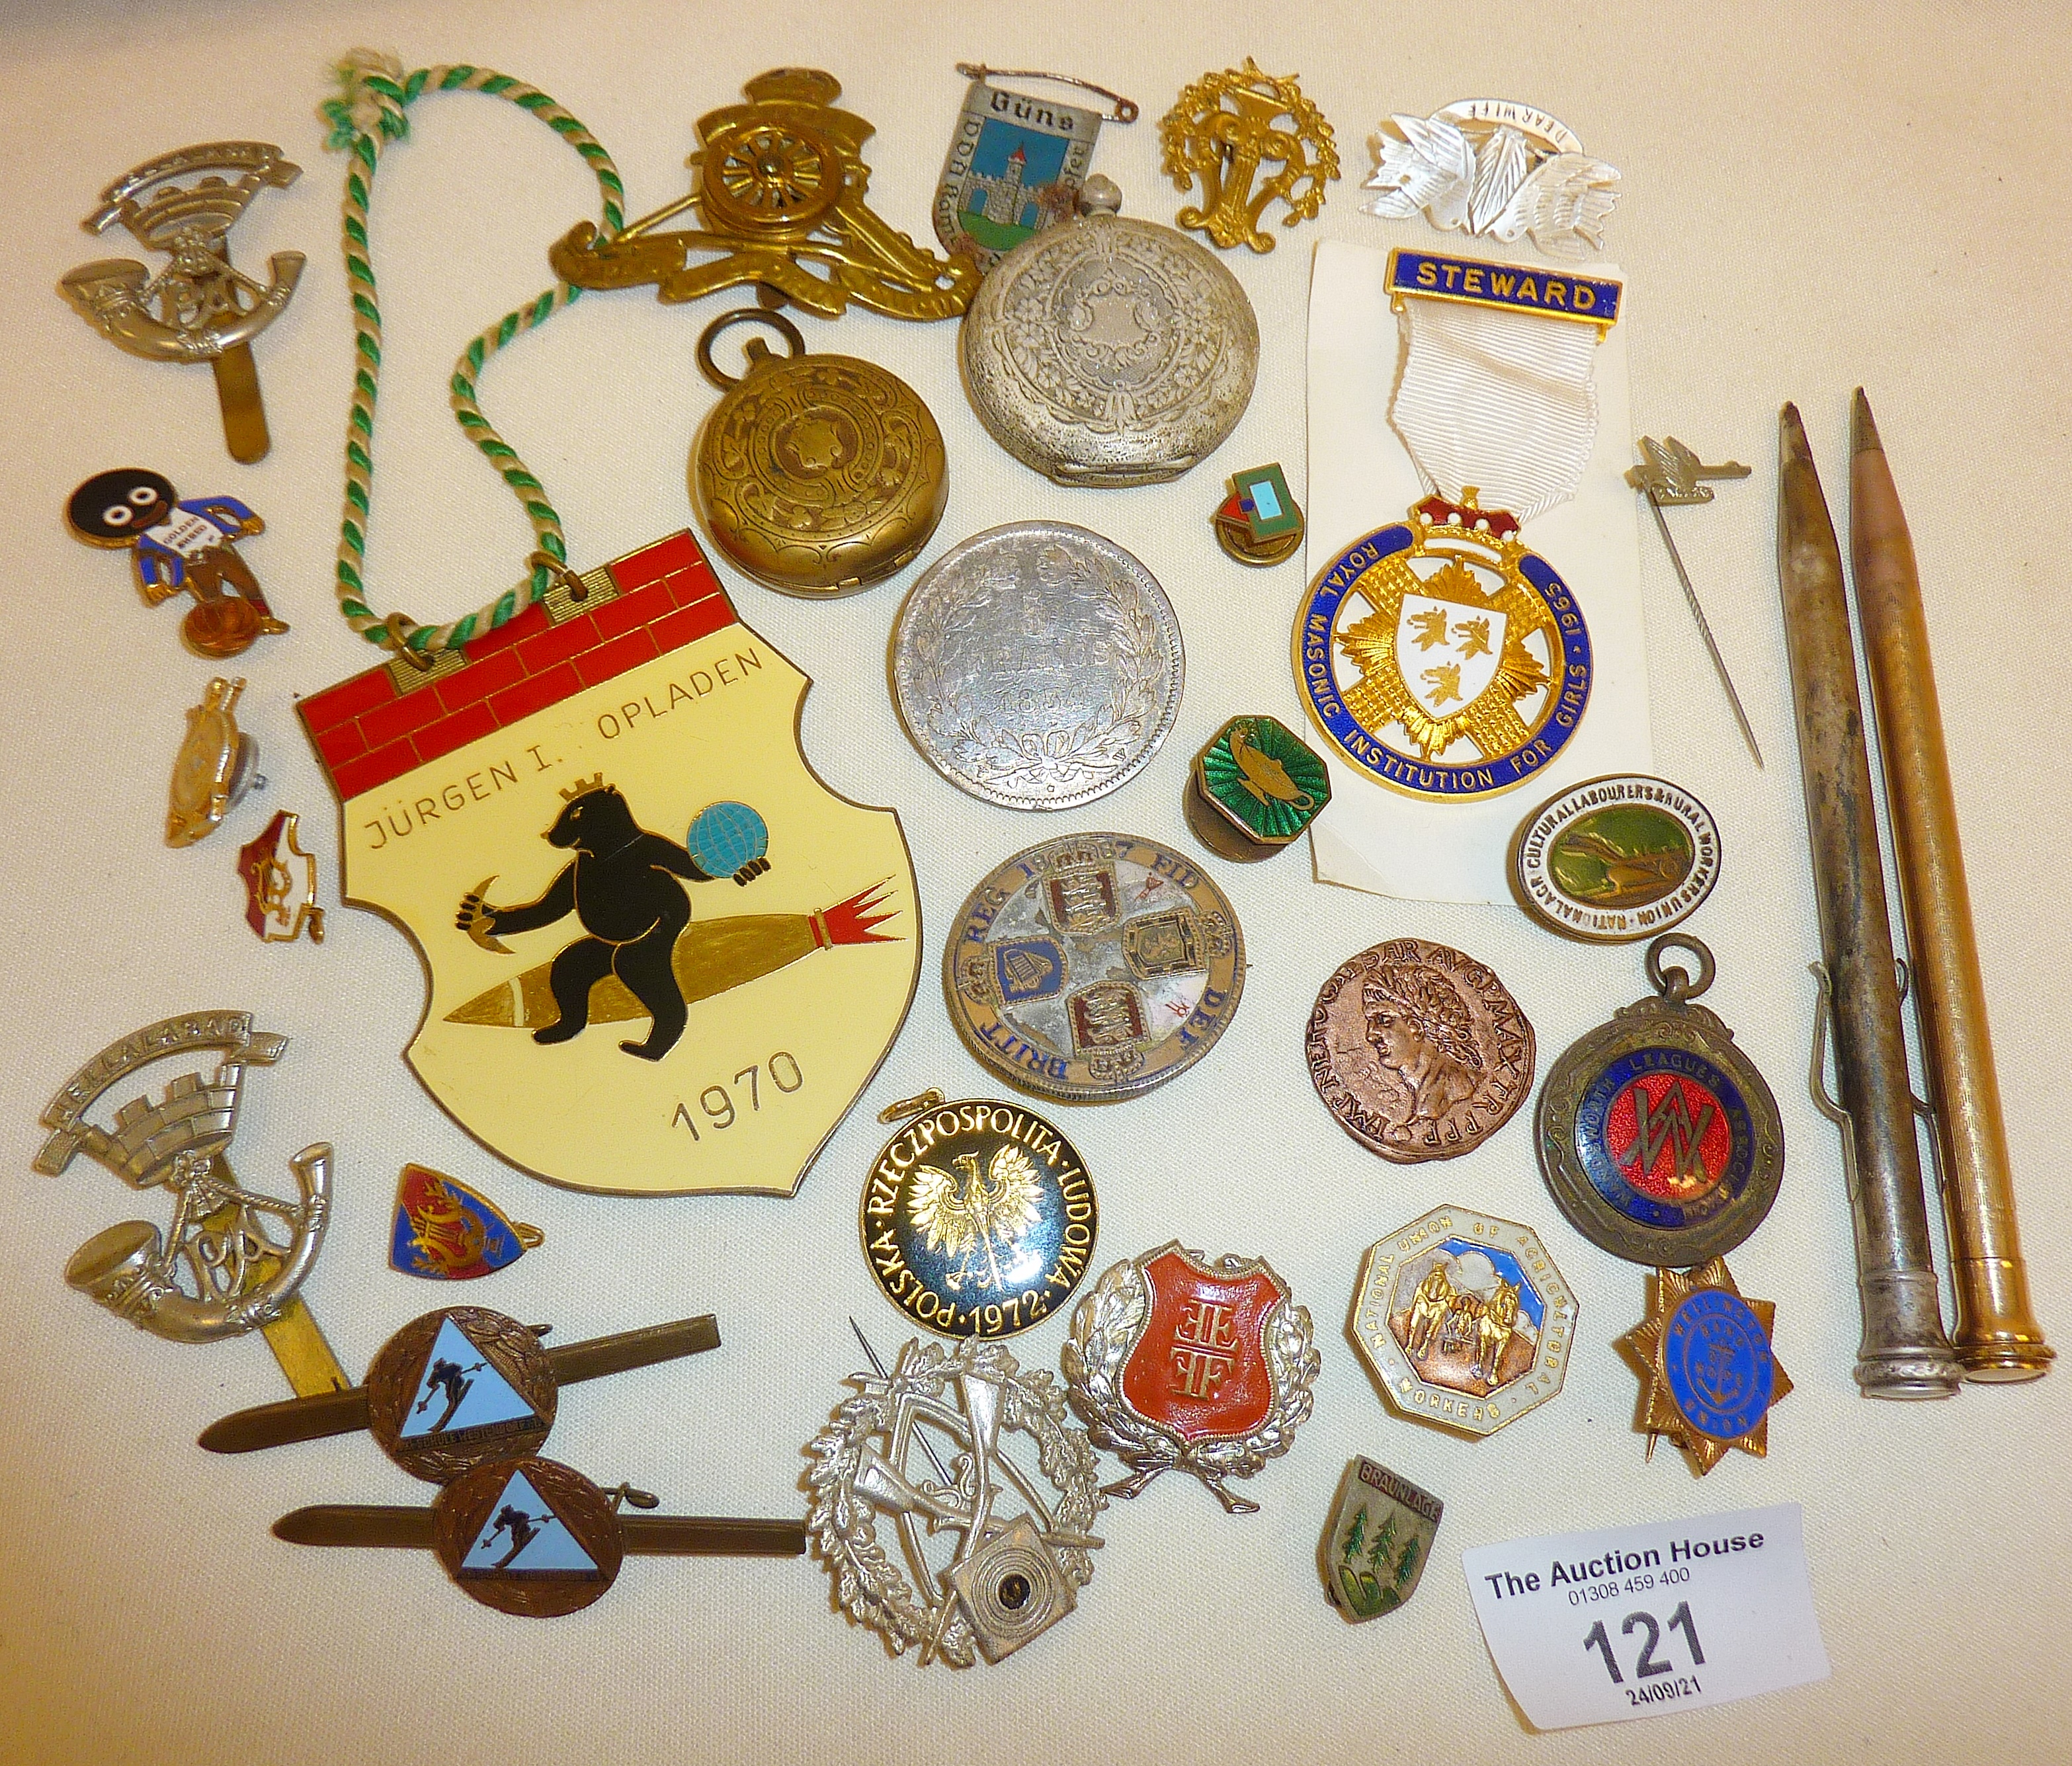 Assorted badges, some mounted silver coins, military cap badges, Eversharp pencils, etc.